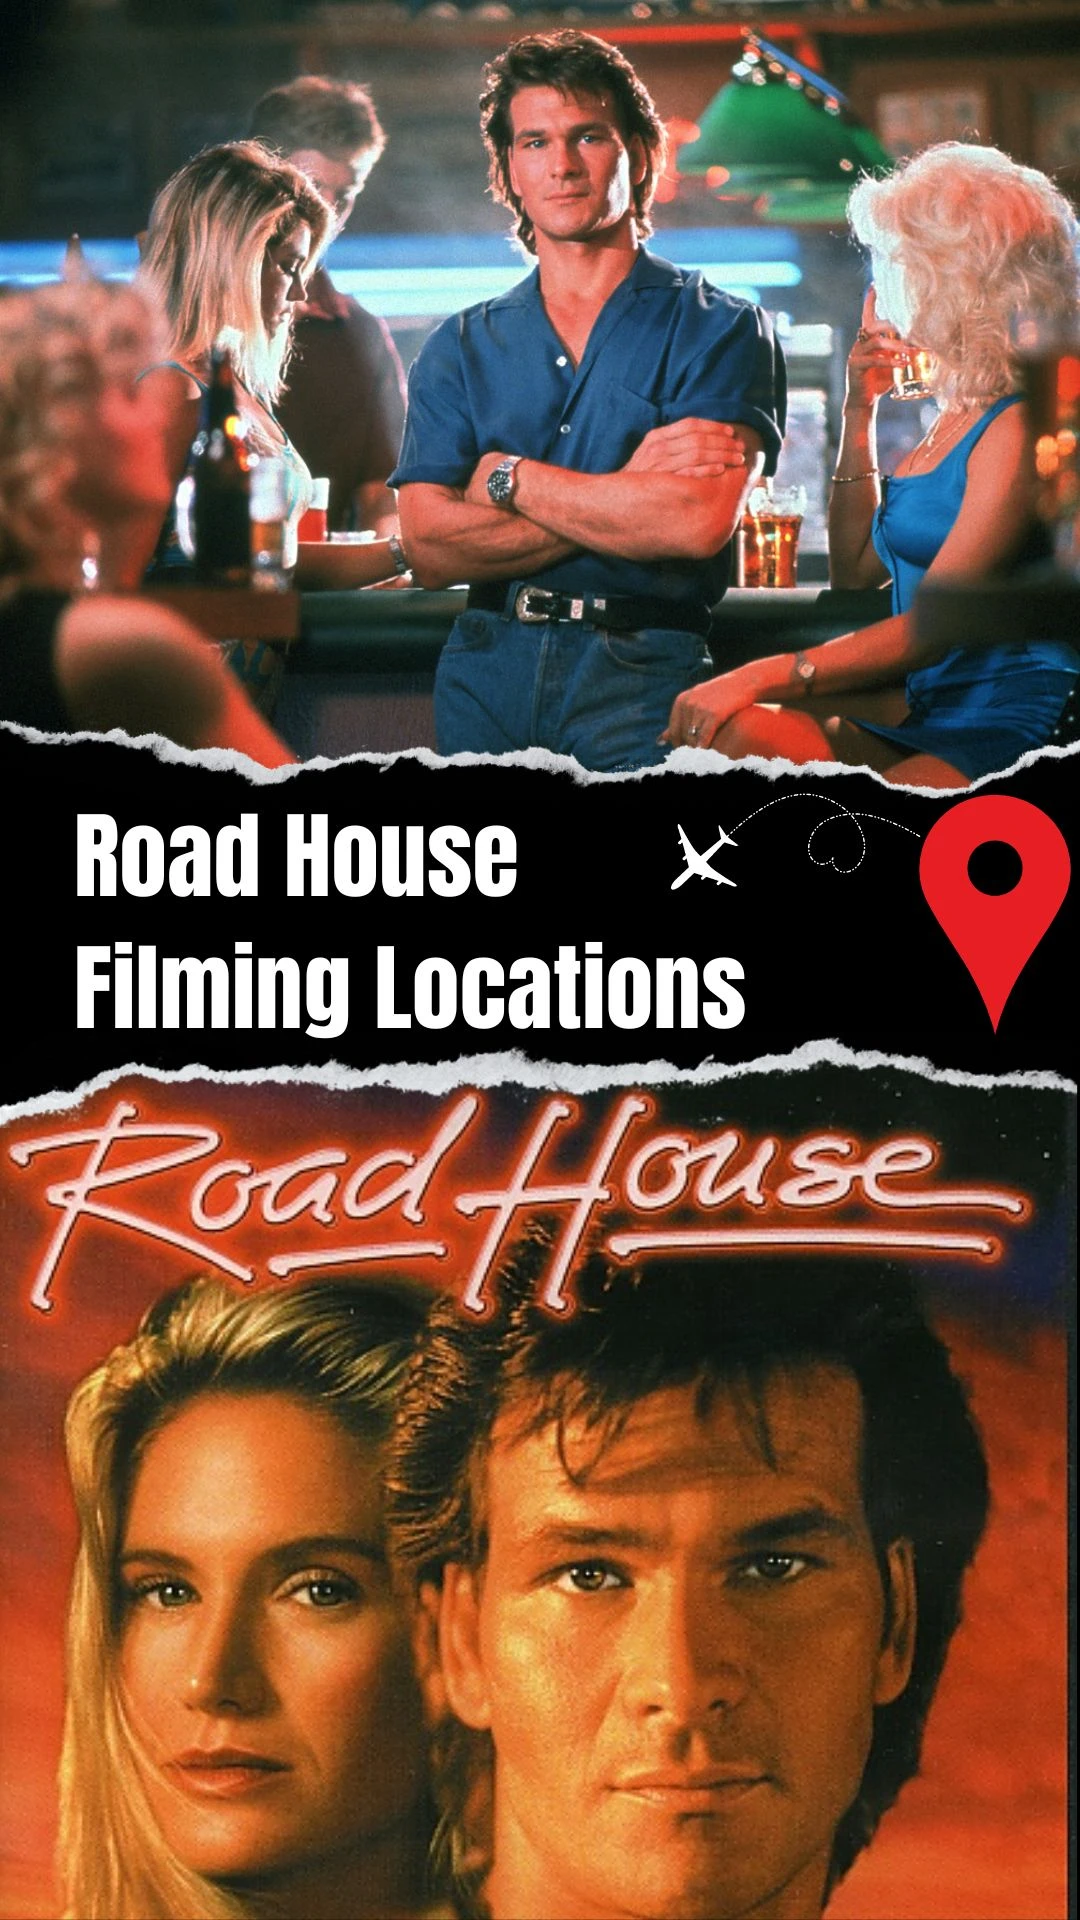 Road House Filming Locations